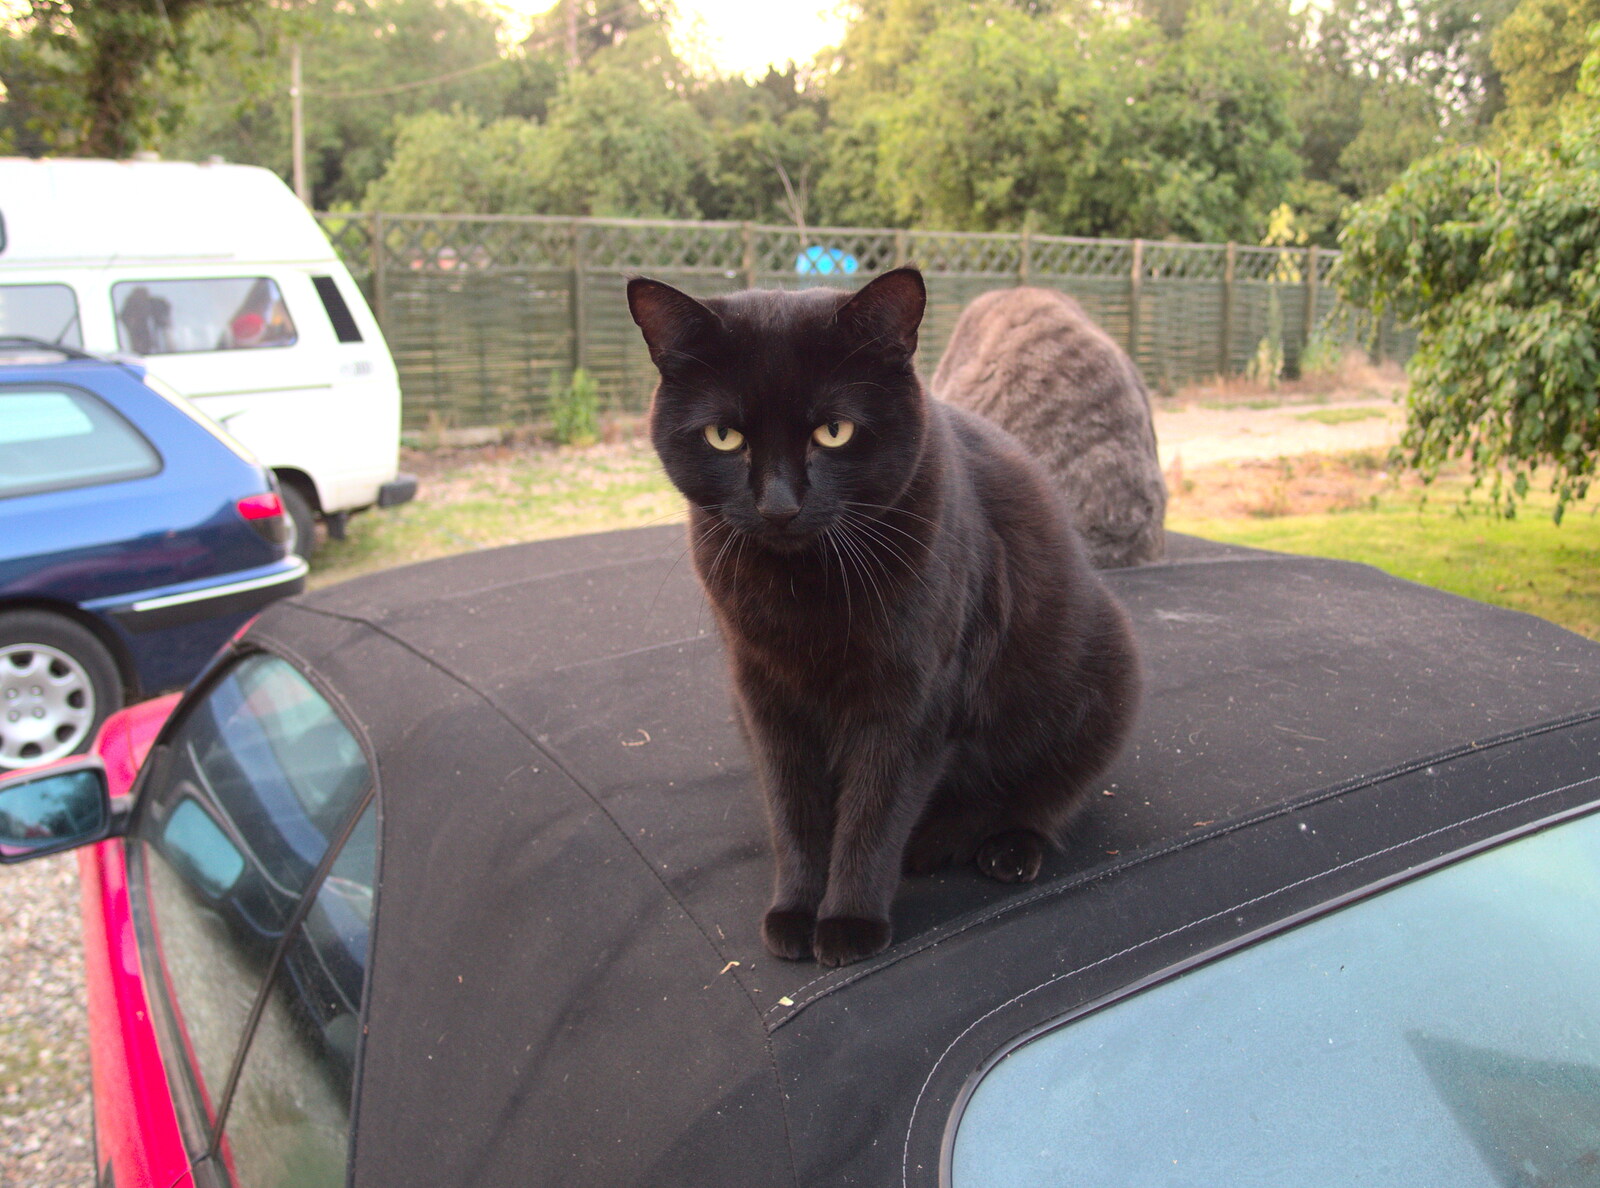 Millie the Mooch on the car roof from The Demolition of the Garage, Brome, Suffolk - 17th July 2013